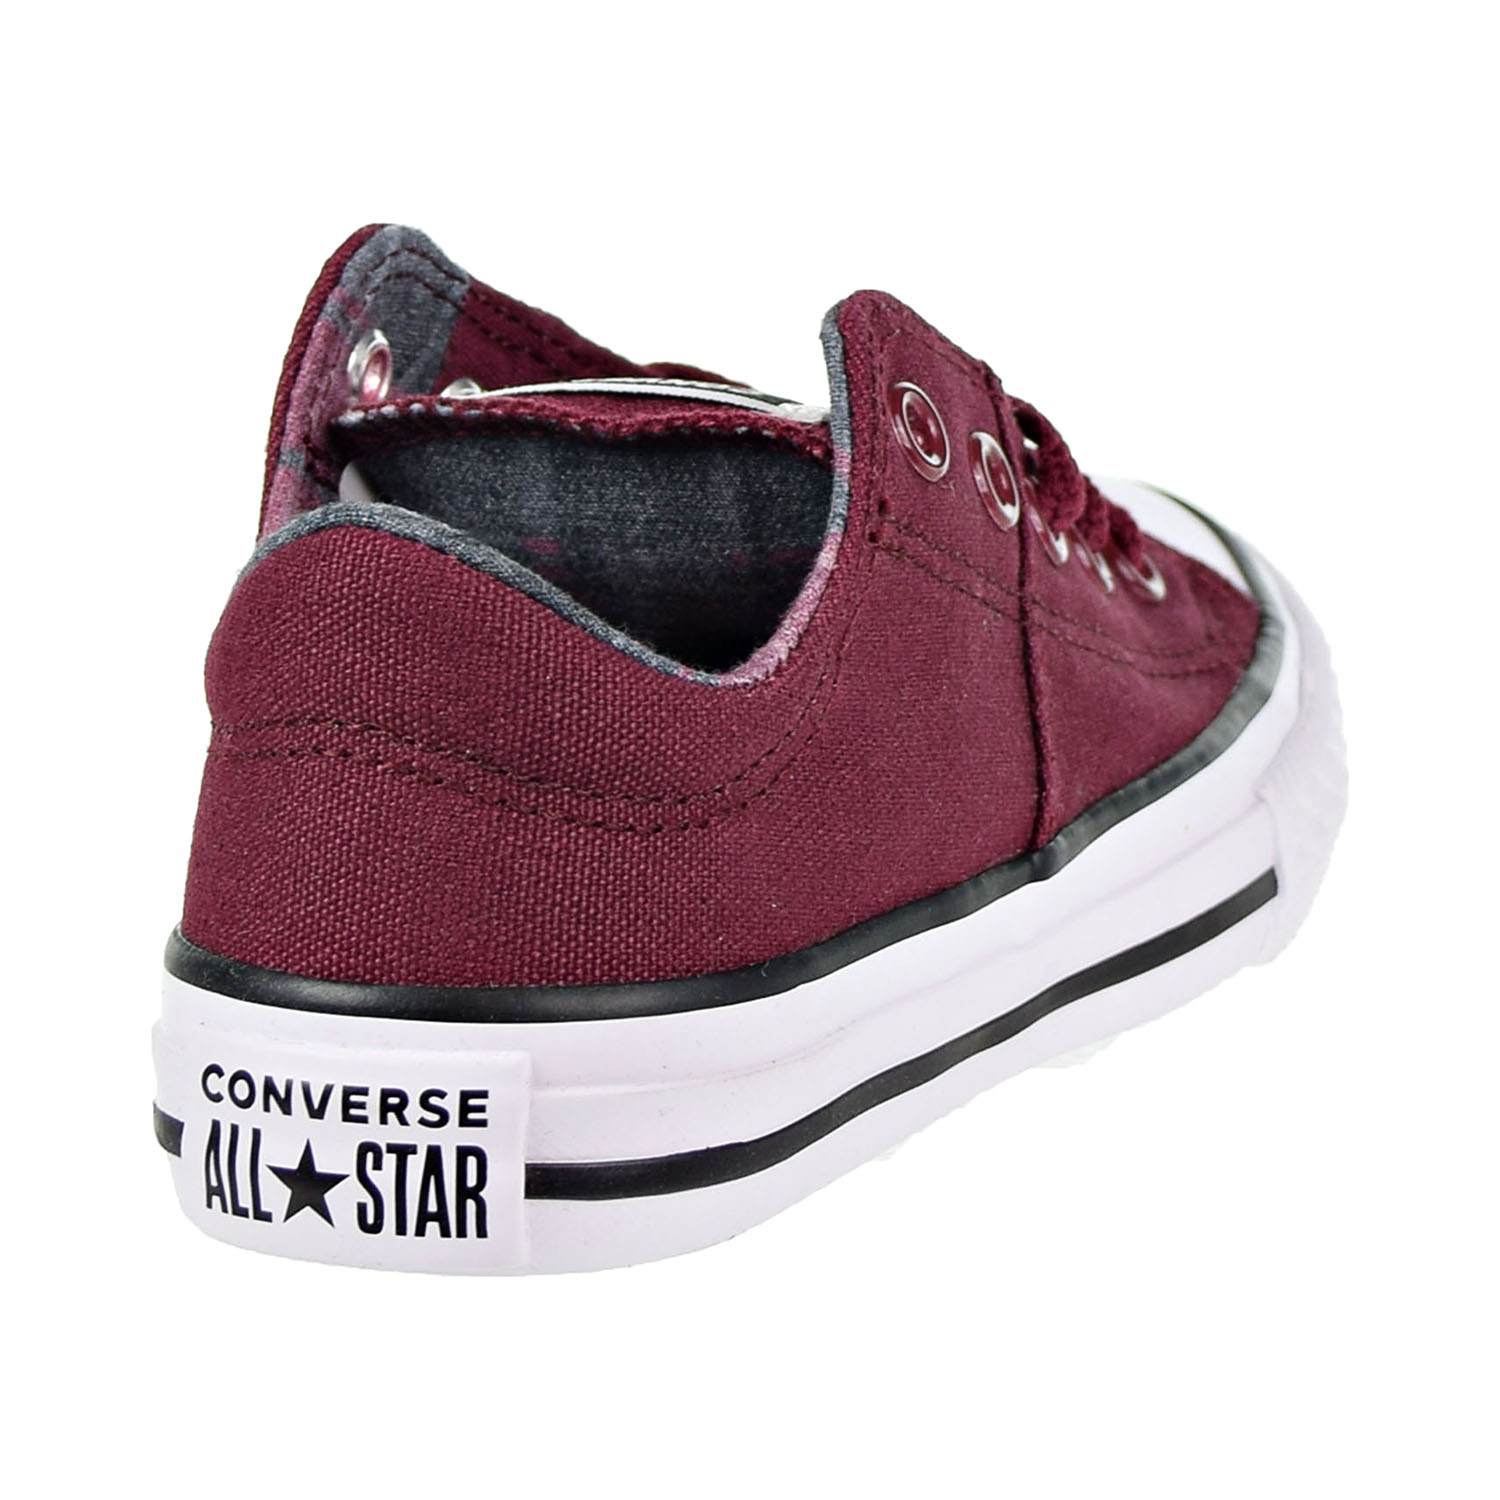 Converse Chuck Taylor All Star Madison Ox Little Kids/Big Kids Shoes Burgundy 661912f - image 3 of 6